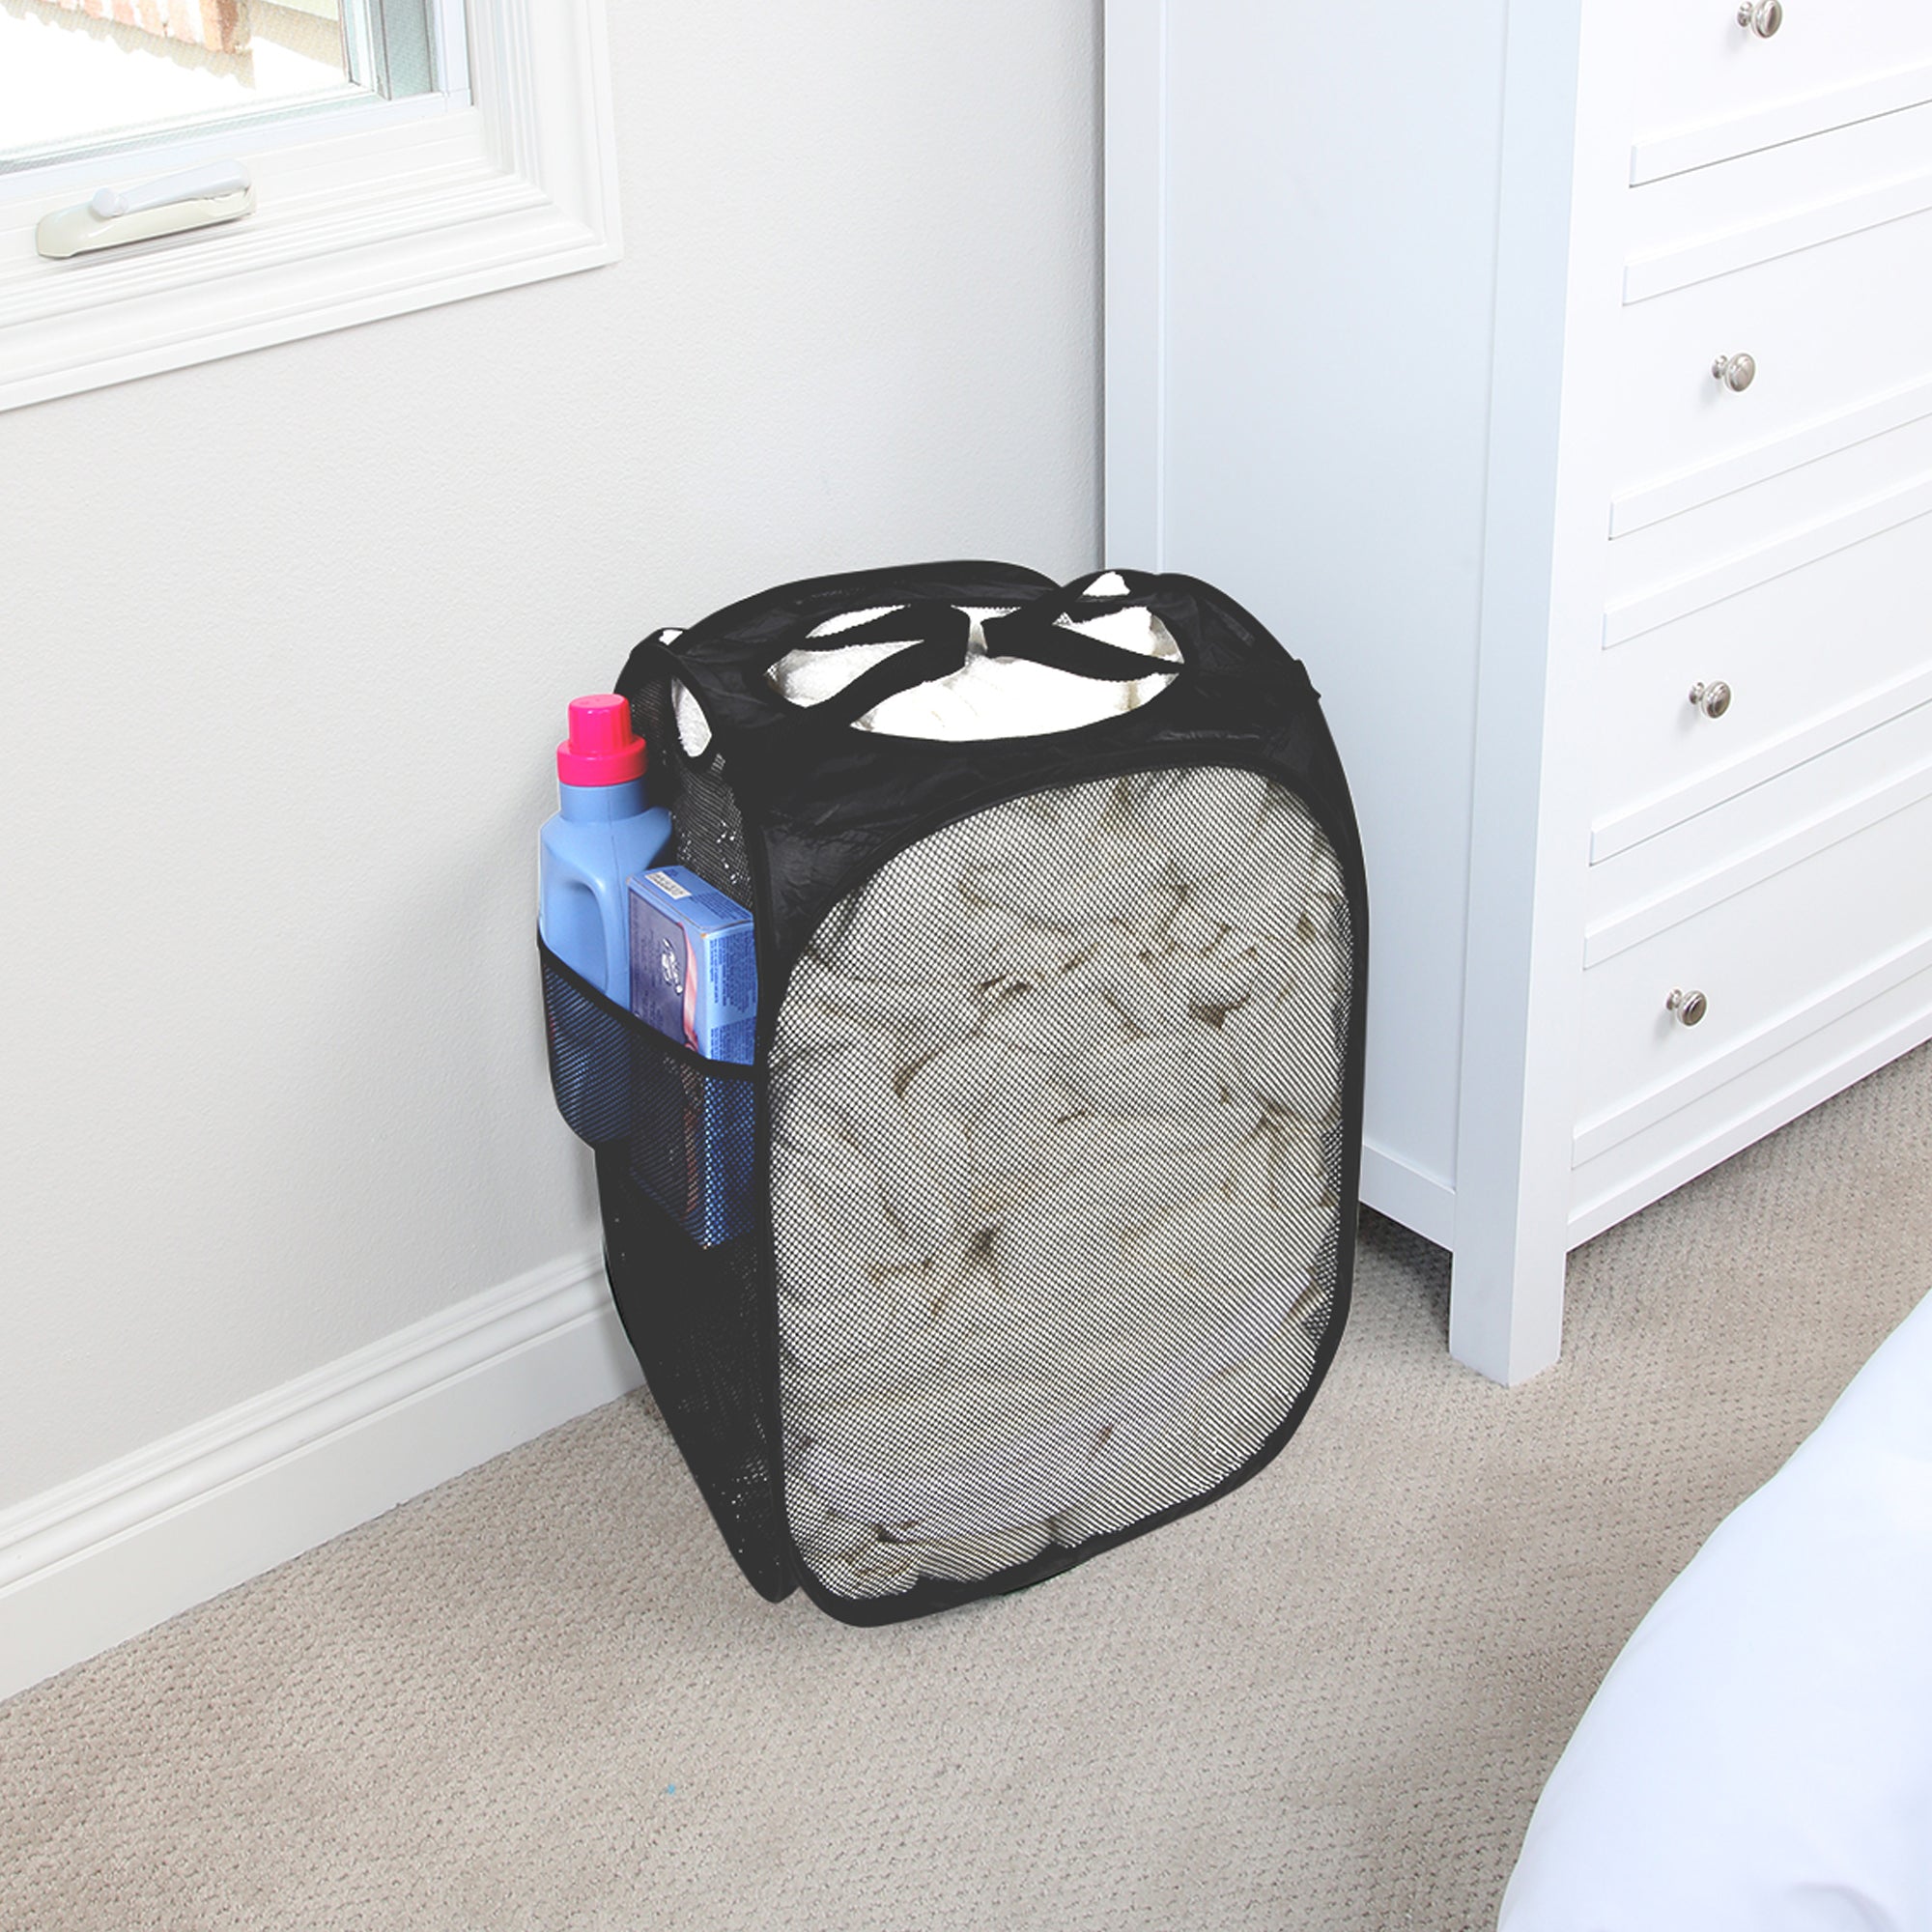 Deluxe Mesh Pop Up Square Laundry Hamper with Side Pocket and Handles - VentilAir Fabric - Collapsible Smart Design® 2